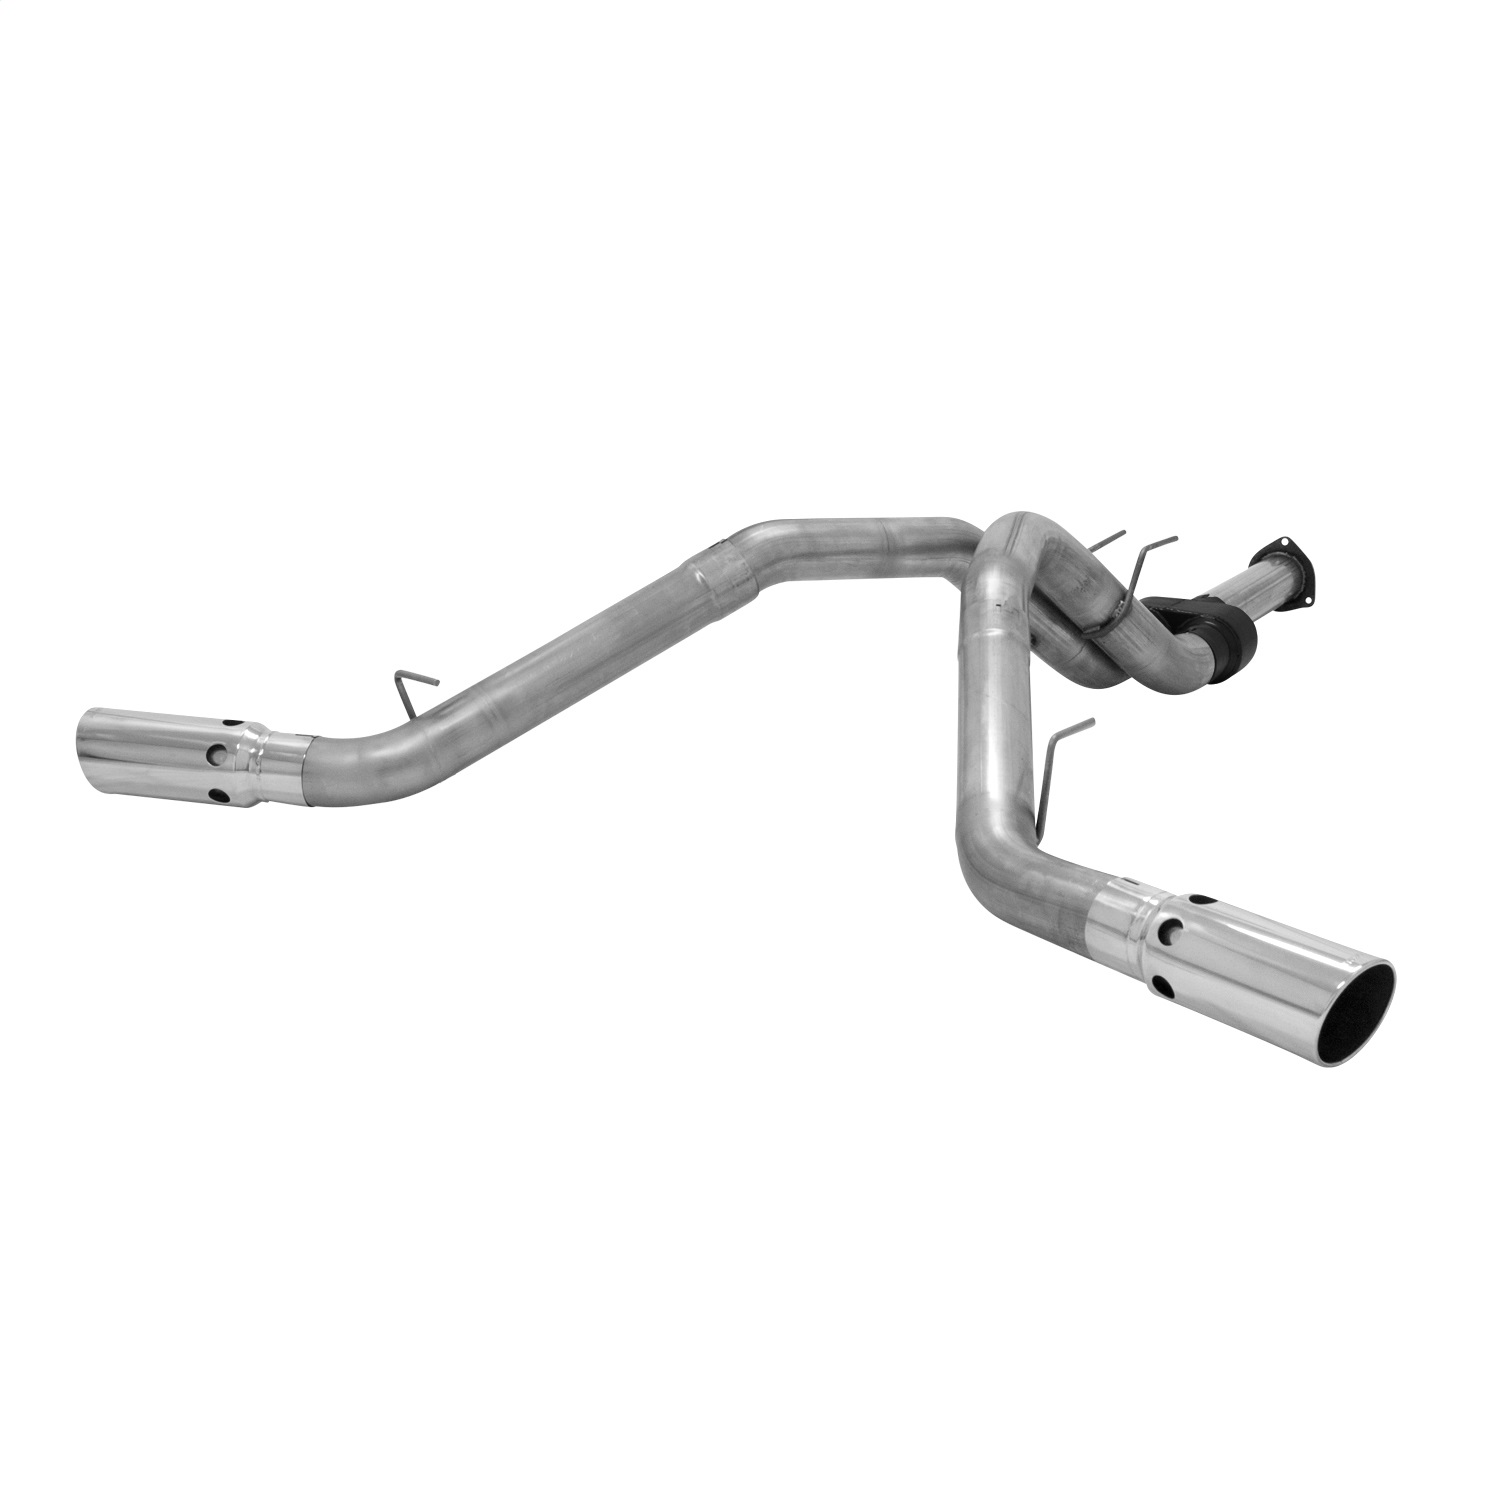 Flowmaster Flowmaster 817644 Force II DPF-Back Exhaust System